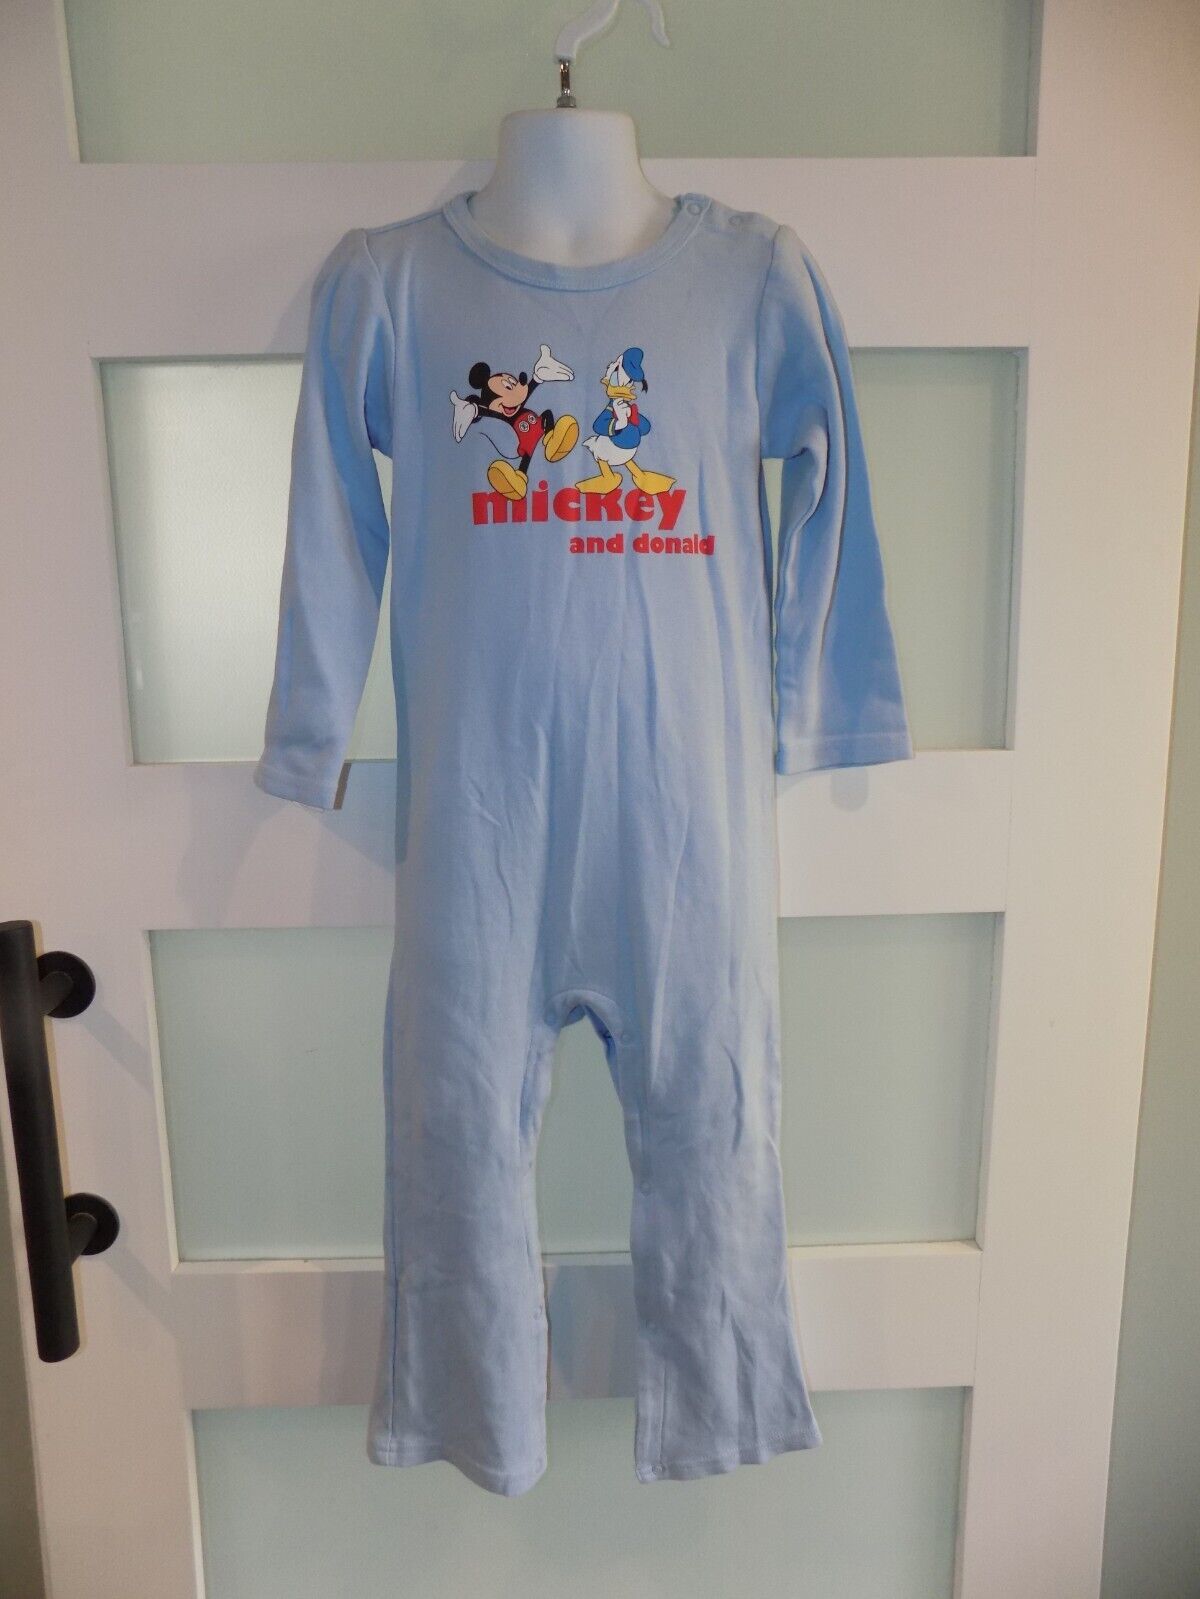 DISNEY MICKEY MOUSE & DONALD DUCK 1PC ROMPER SIZE 3Y TODDLER'S - $26.28